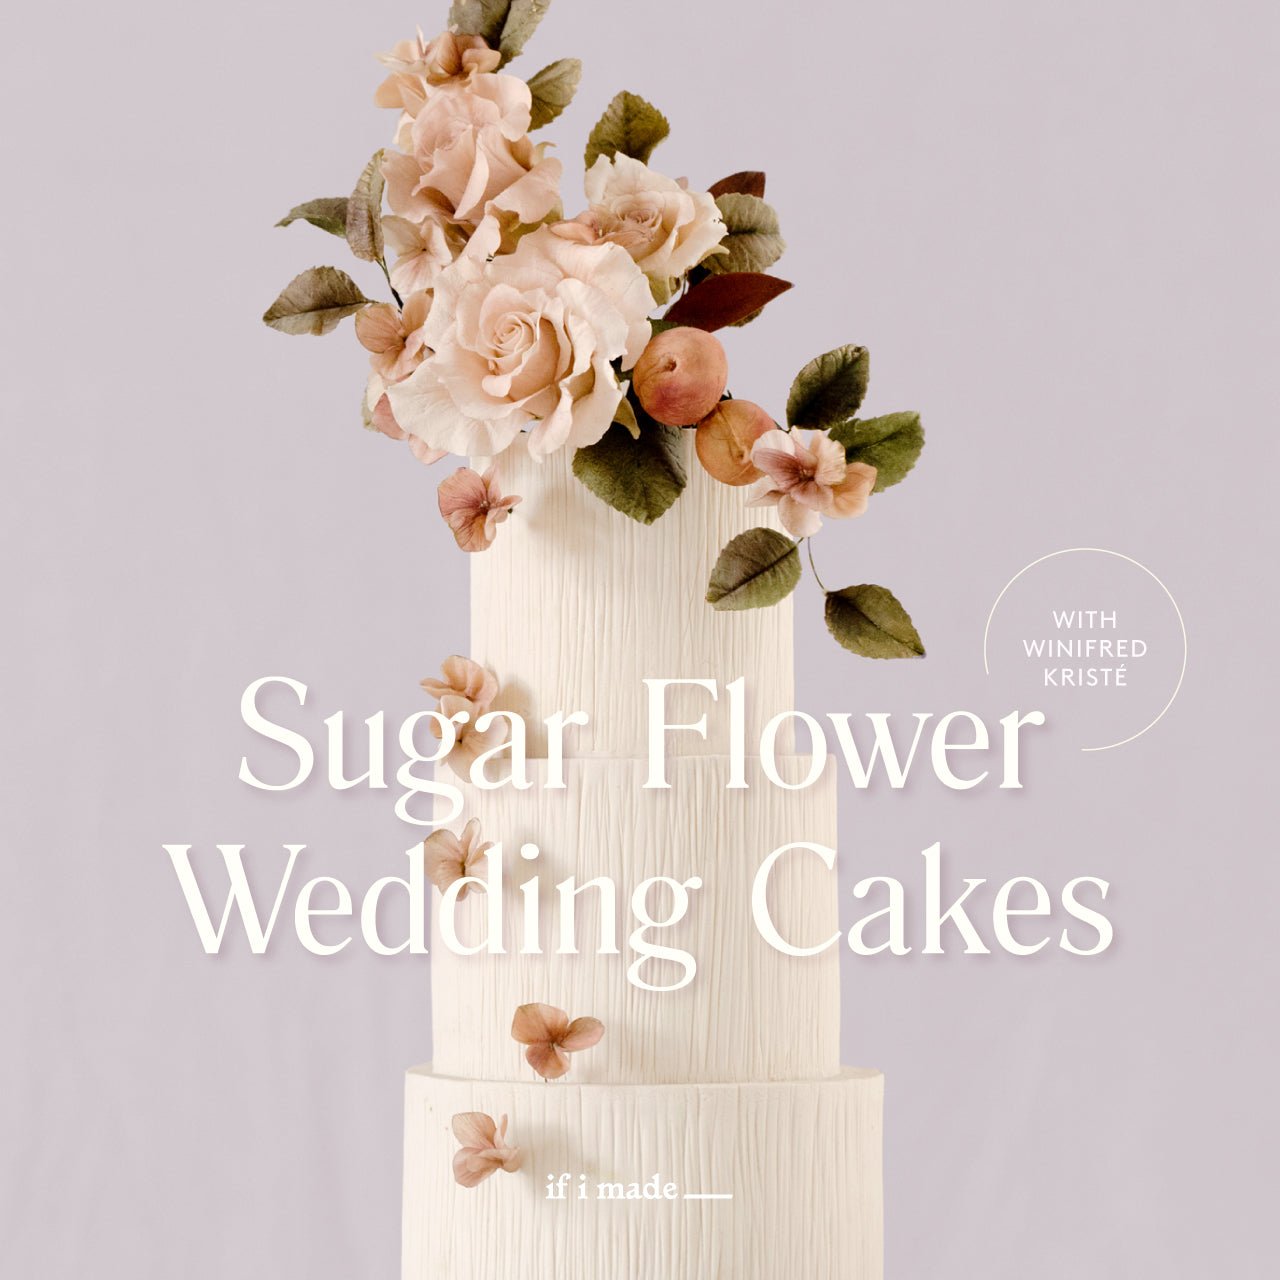 Sugar Flower Wedding Cakes with Winifred Kristé Cake (RPP) - 17 payments of $99